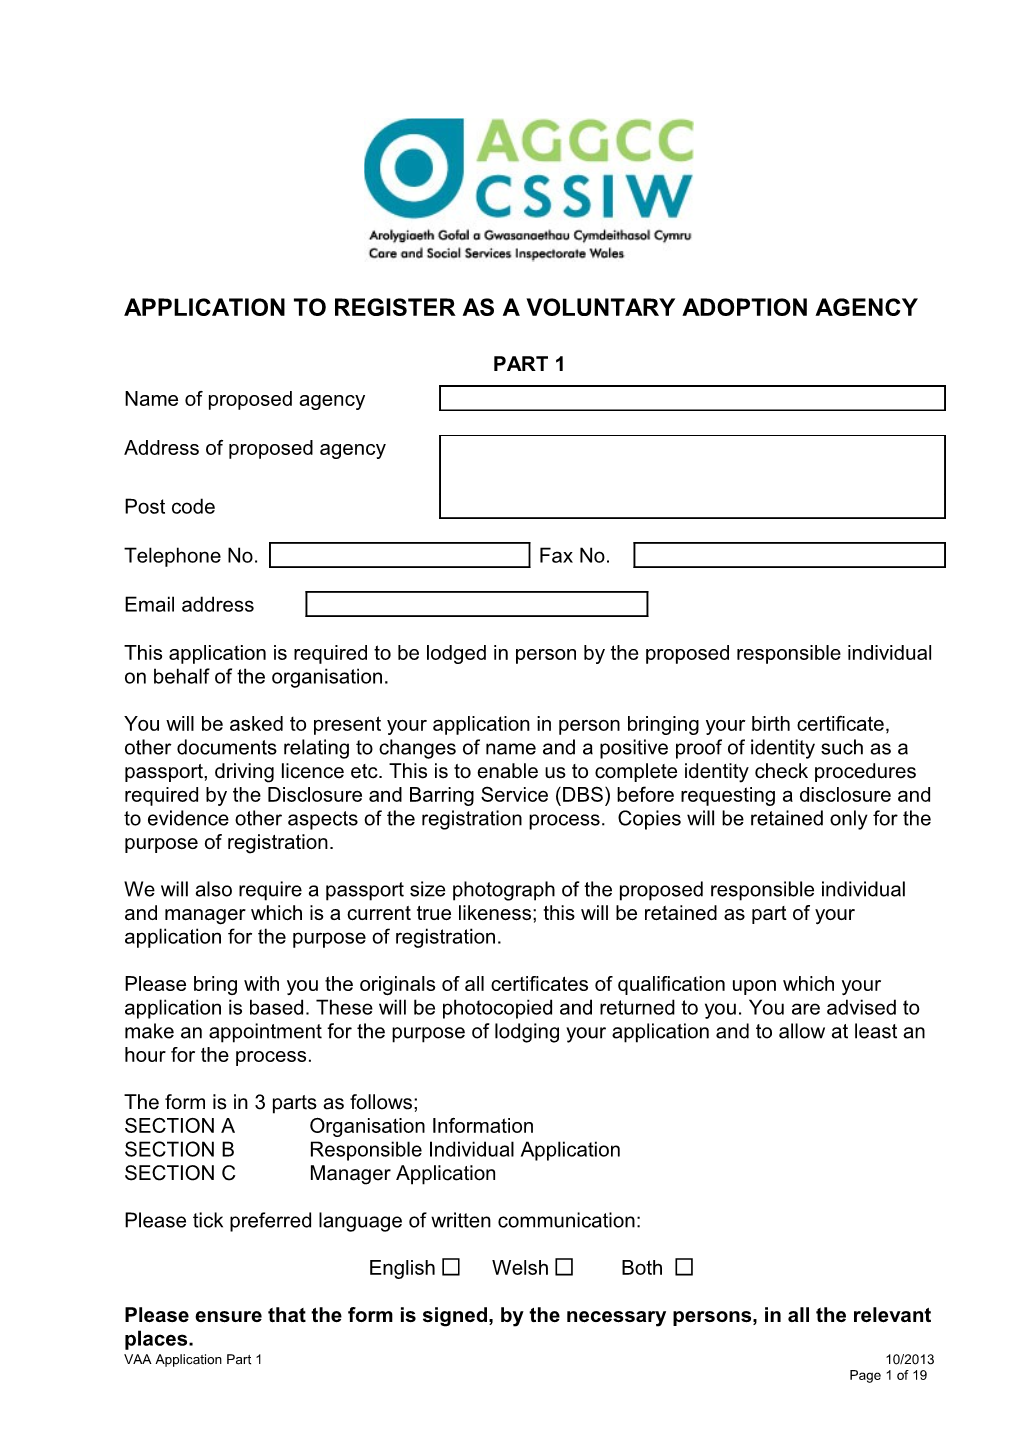 Full Name of the Applicant Date of Birth